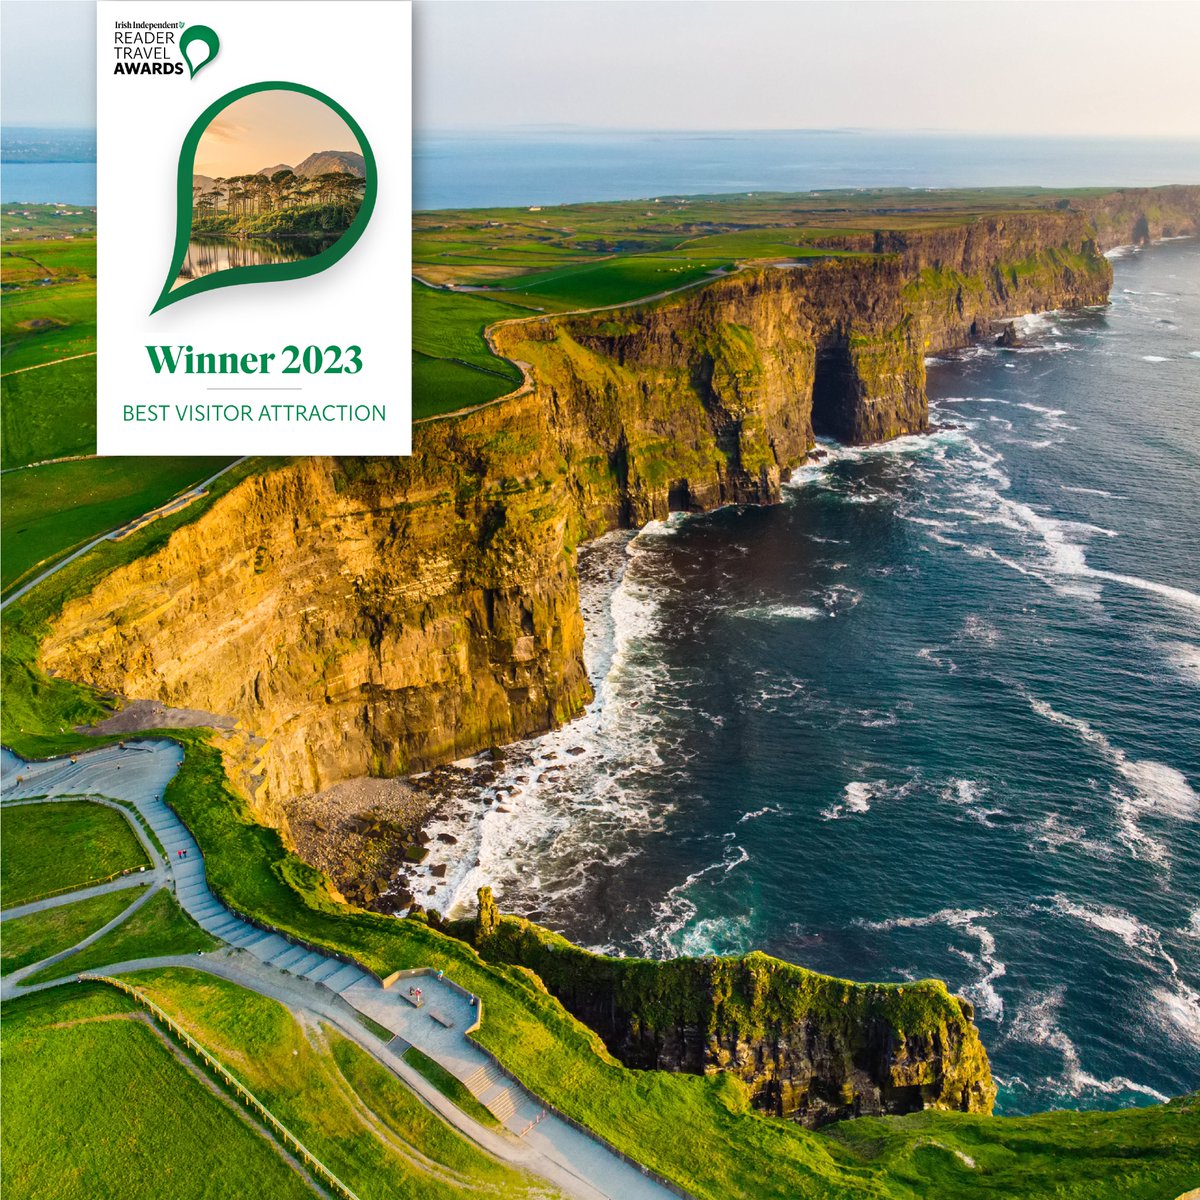 We are absolutely thrilled to have won 'Ireland's Best Visitor Attraction' in the Reader Travel Awards for 2023!🥳

A big thank you to everyone who voted for us! 
We cannot wait to welcome you all during our 2023 season!

@indo_travel_ @IndoWeekend #indotravelawards